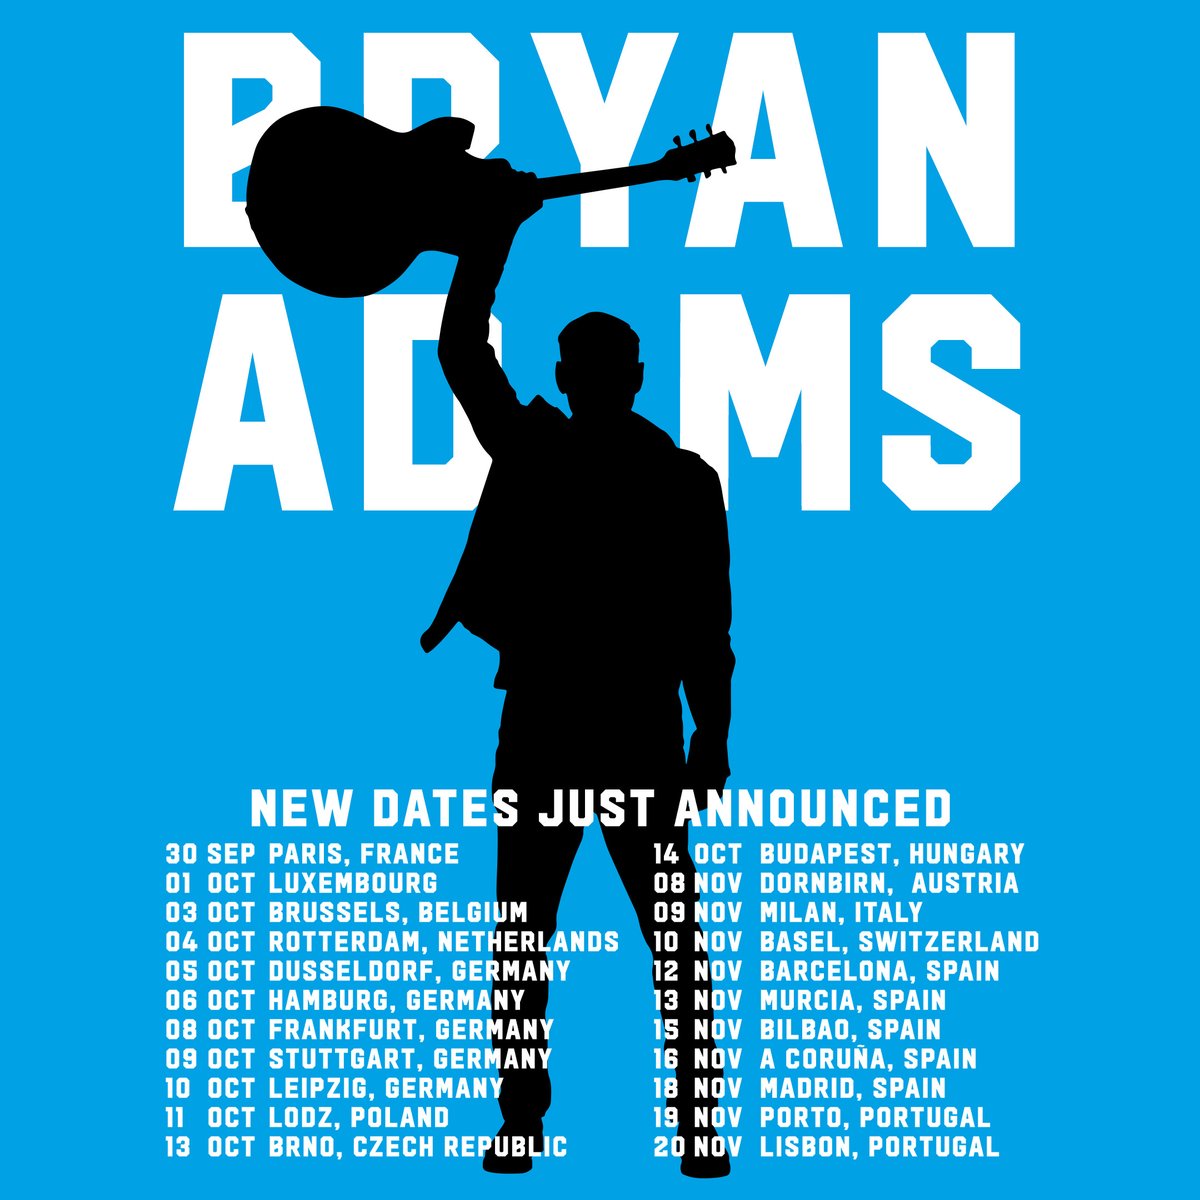 More dates! The international leg of the #sohappyithurts tour continues on September 30th in Paris, France 🇫🇷 Tickets available at bryanadams.com/tours